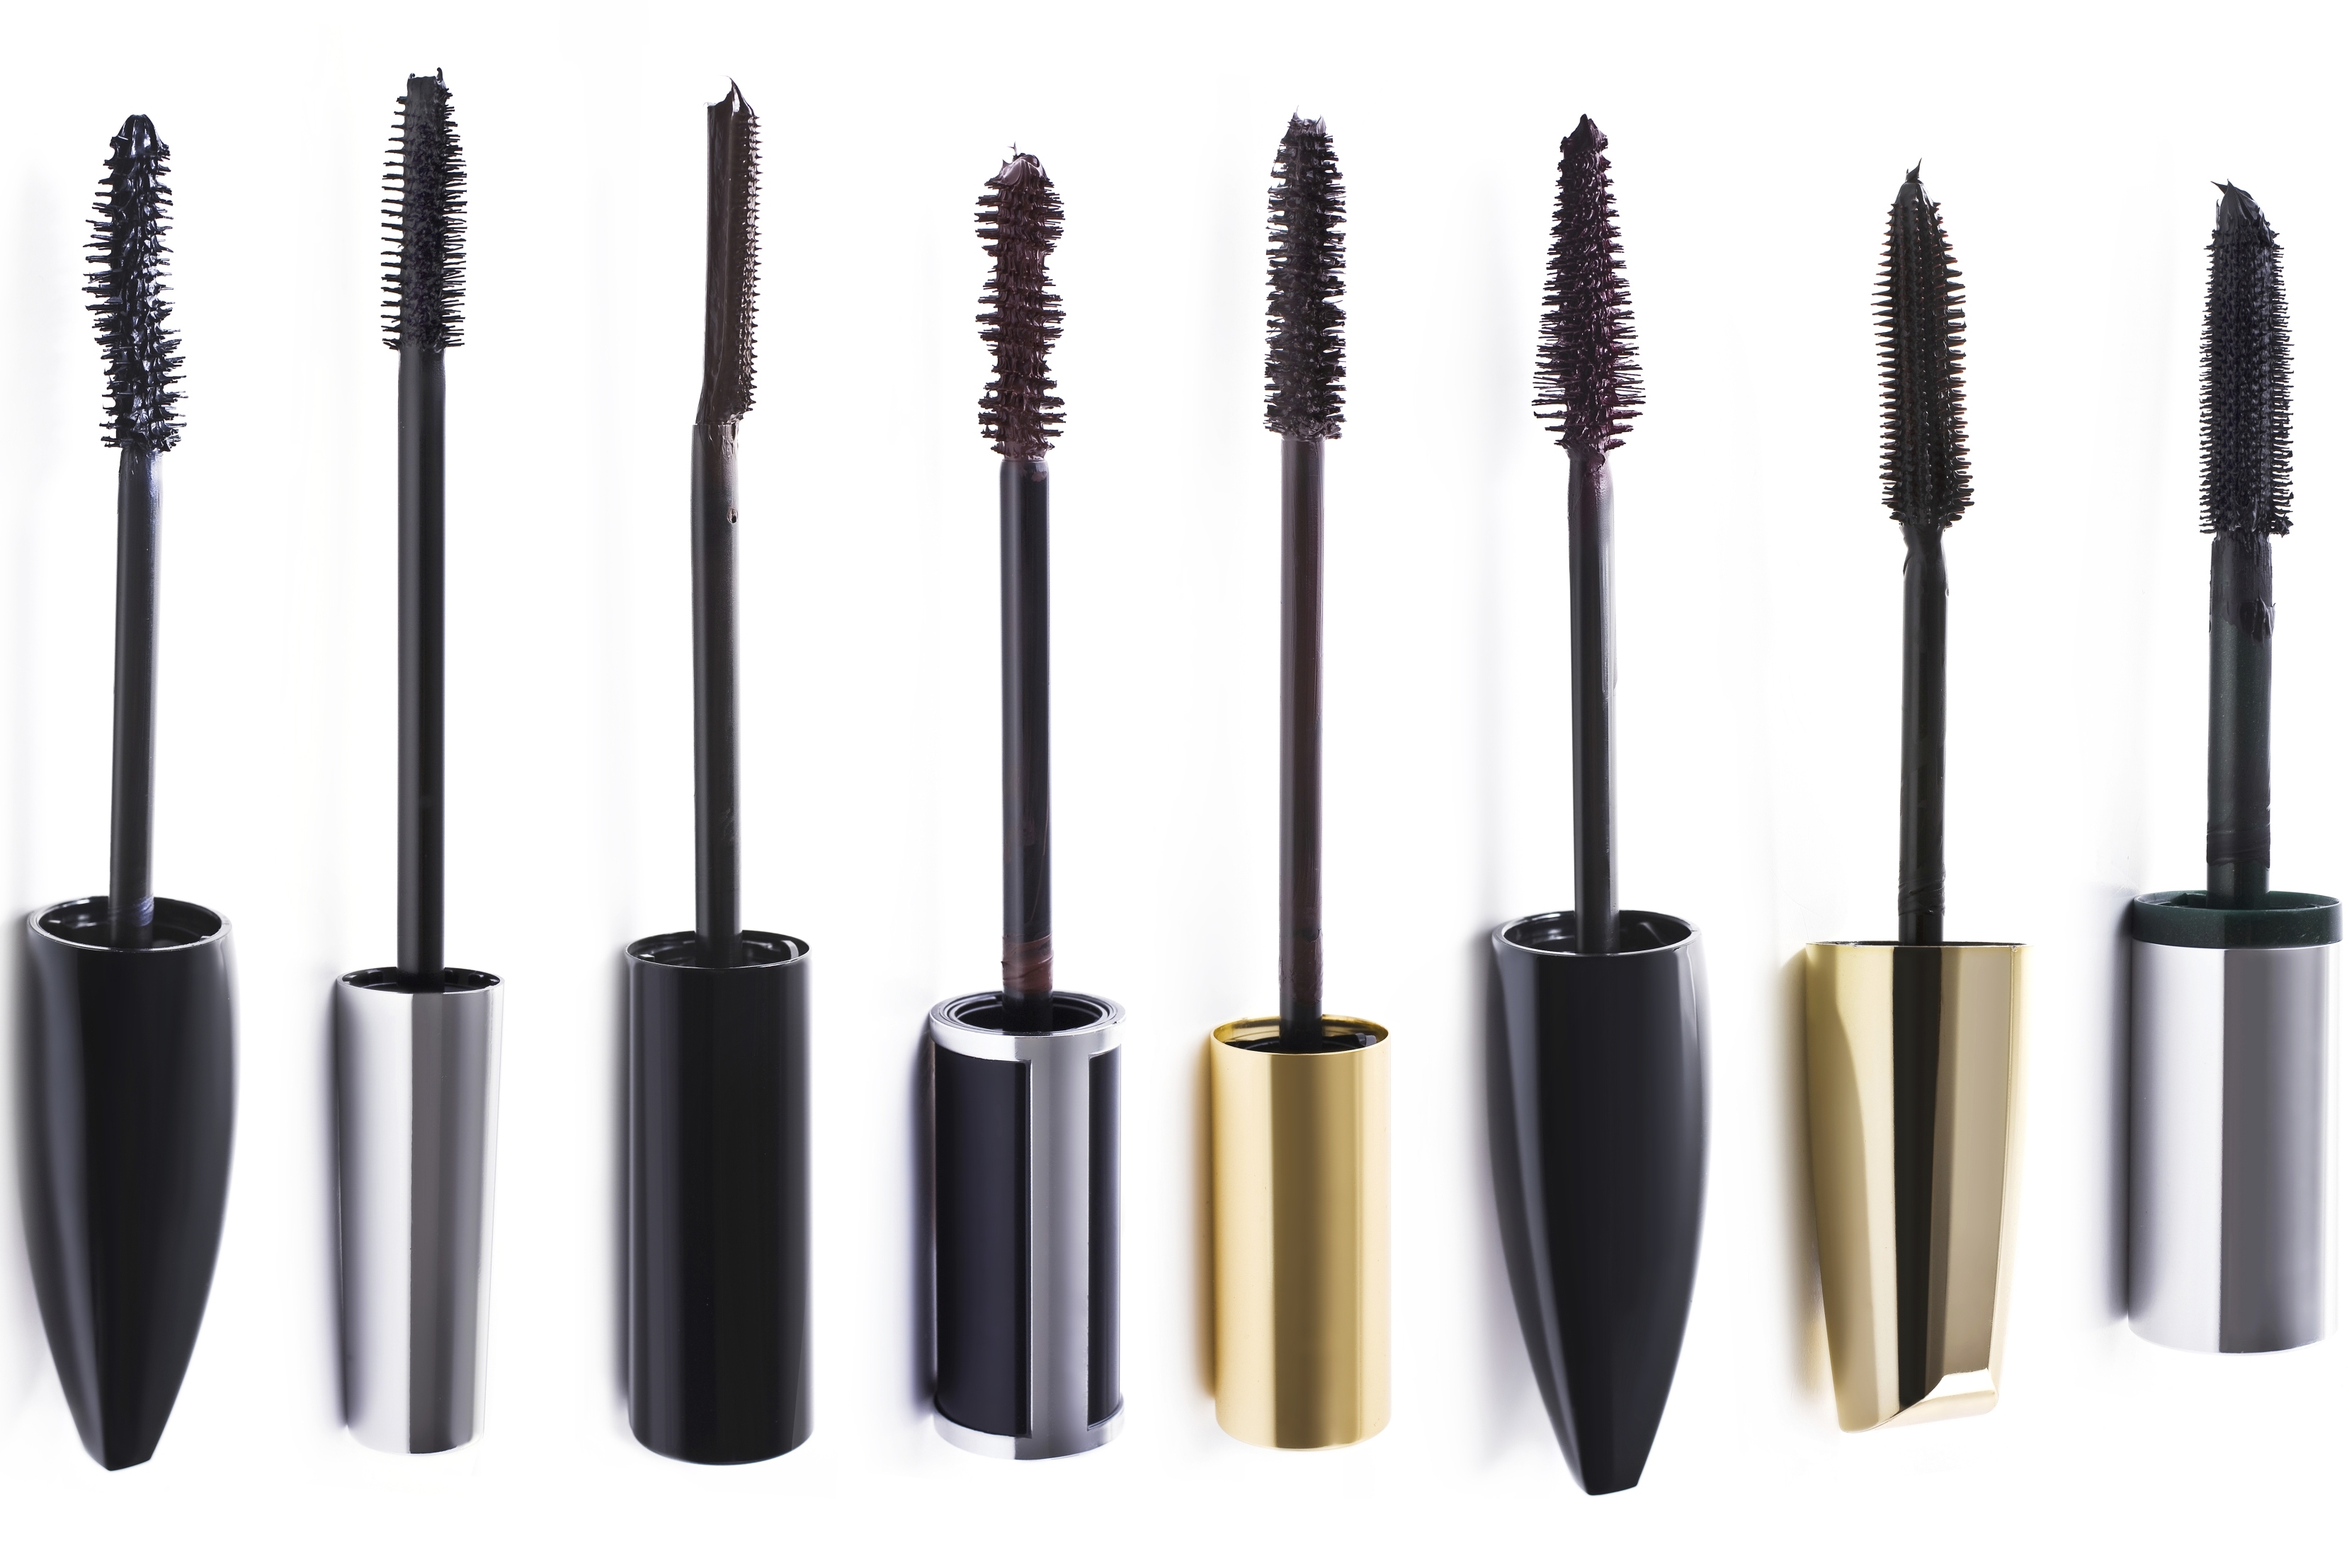 Palette of Colors, Qualities, Shapes. How to Choose Mascara? The Best